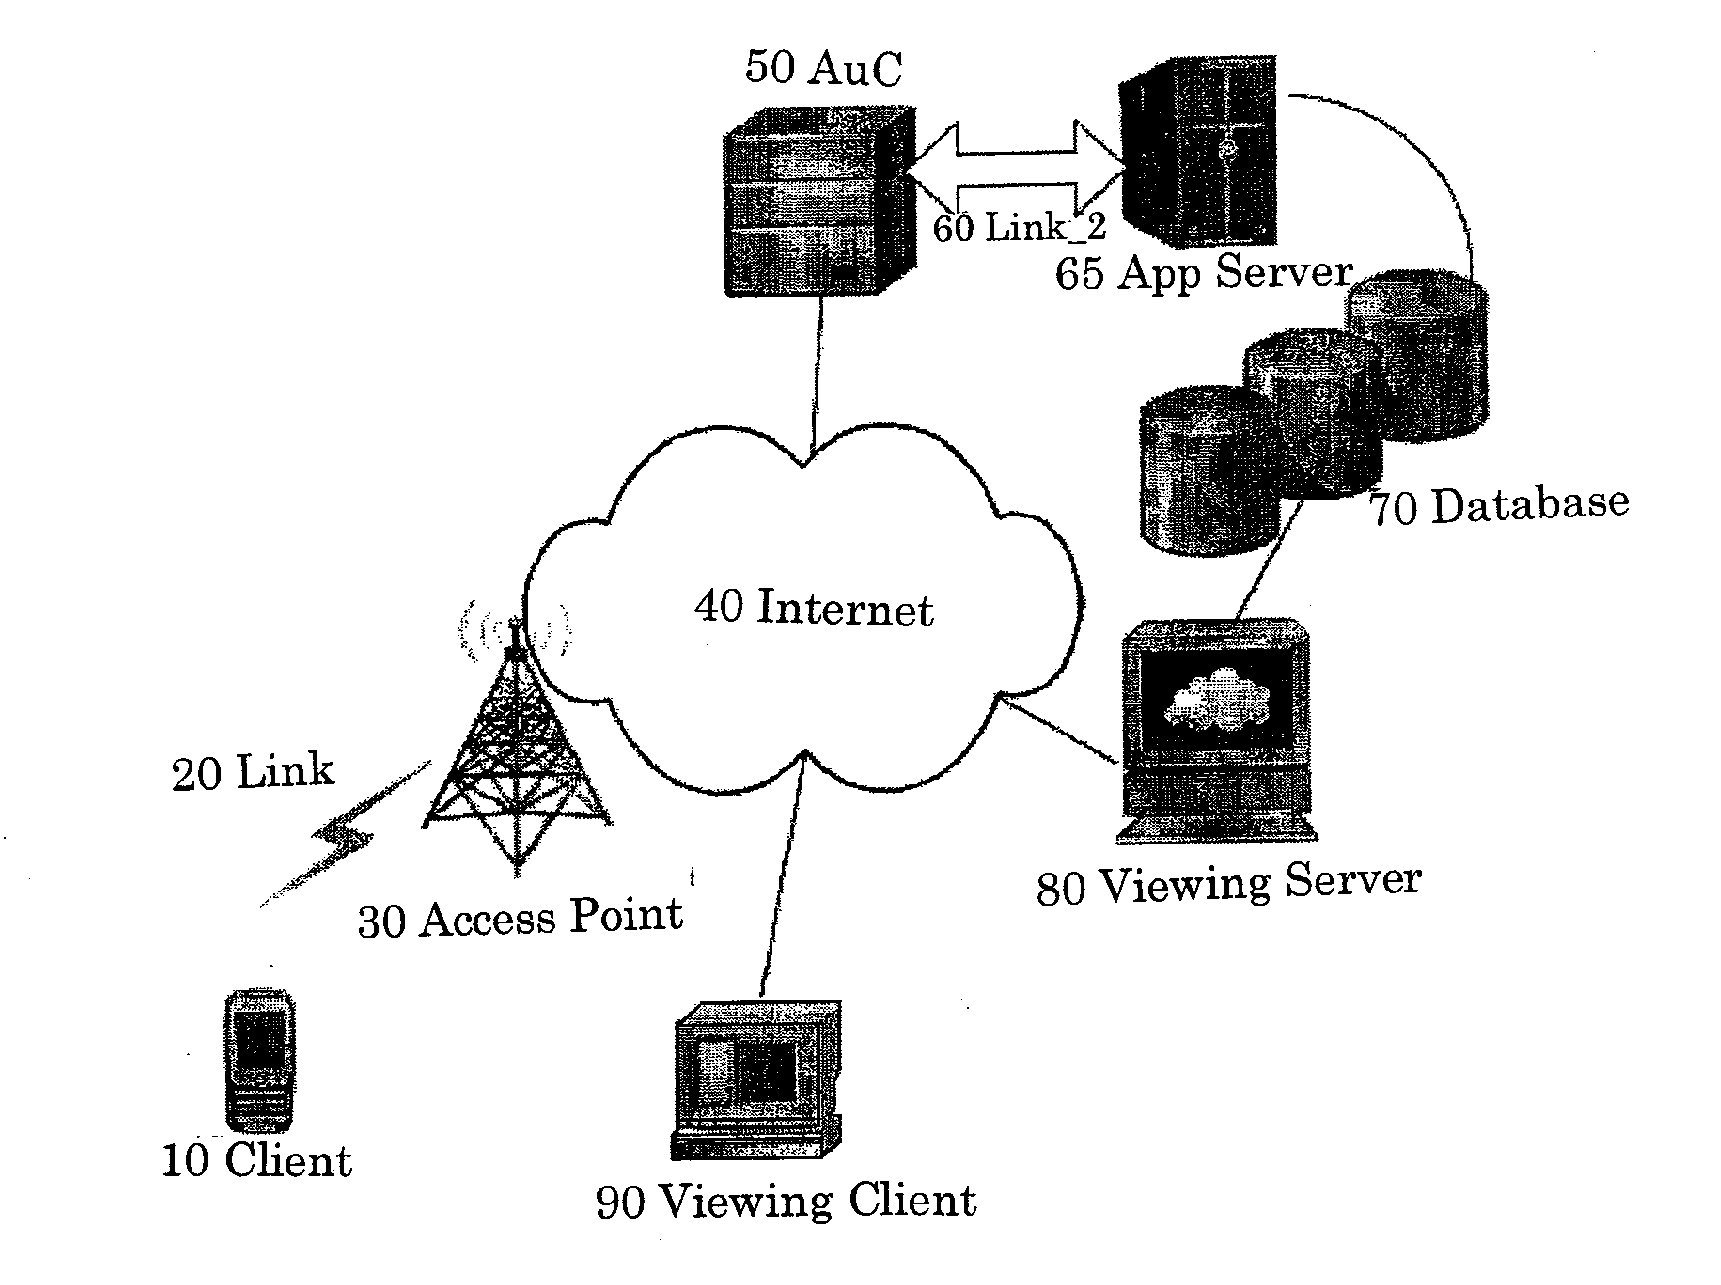 Systems and Methods for Secure Sign-Up Procedures for Application Servers in Wired and Wireless Environments